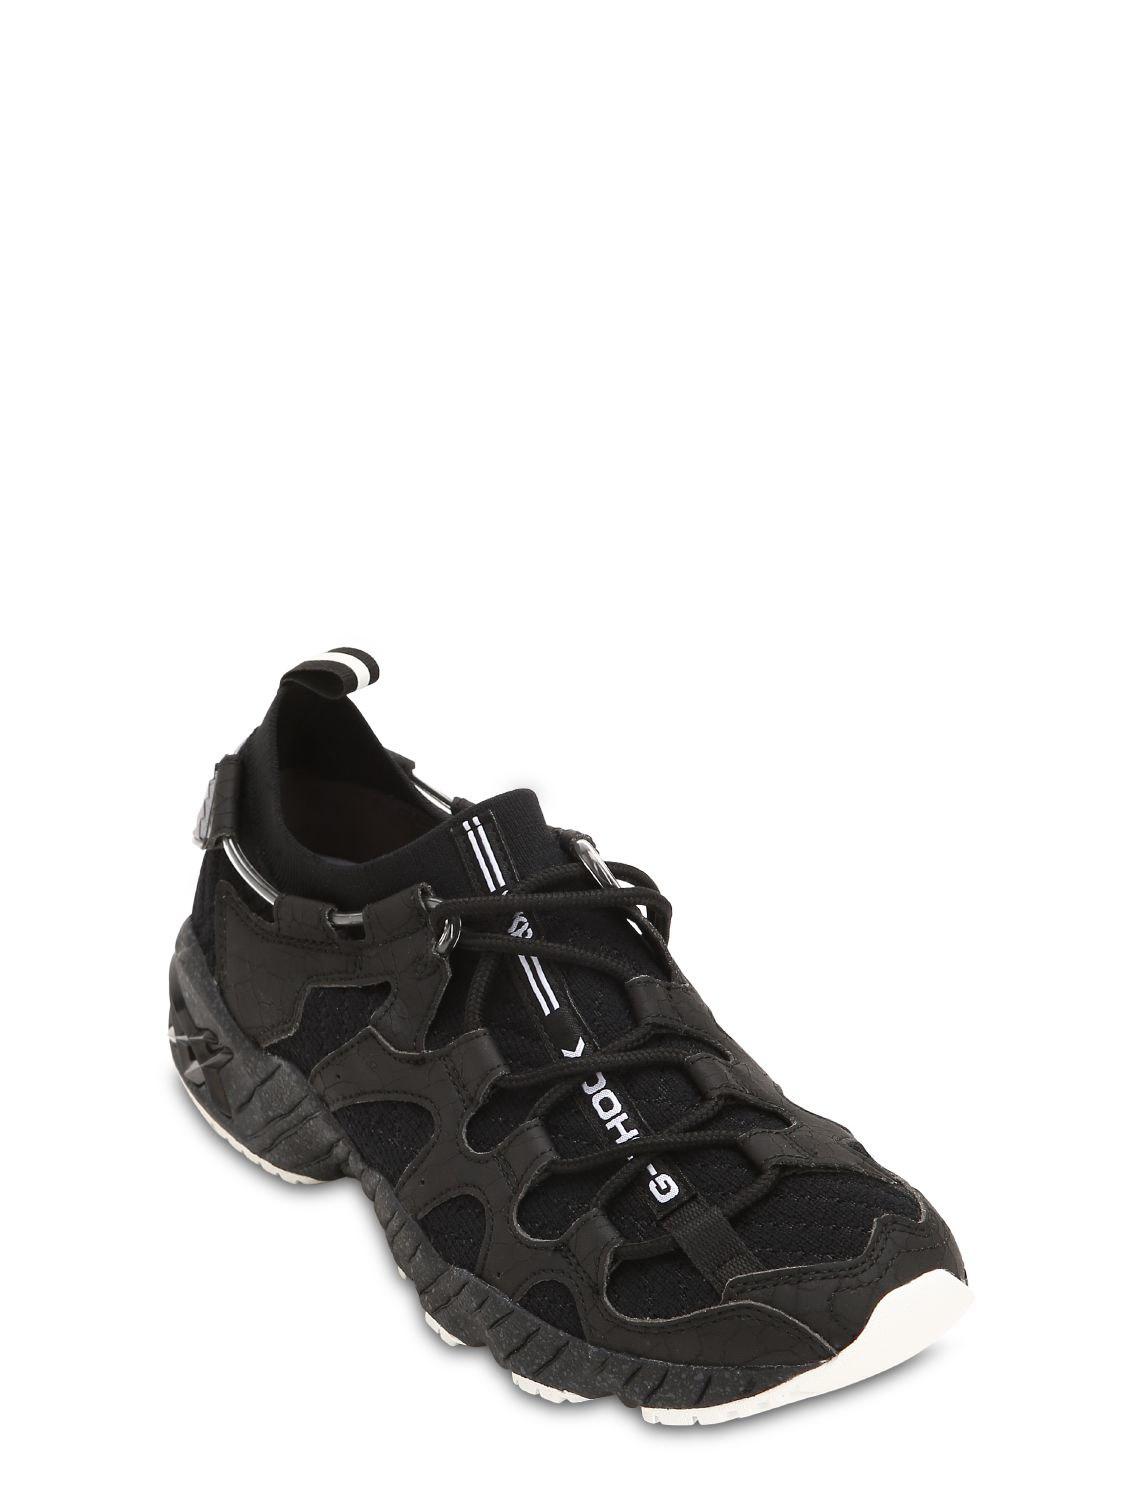 Asics Leather Gel Mai X Casio G-shock Sneakers in Black for Men | Lyst